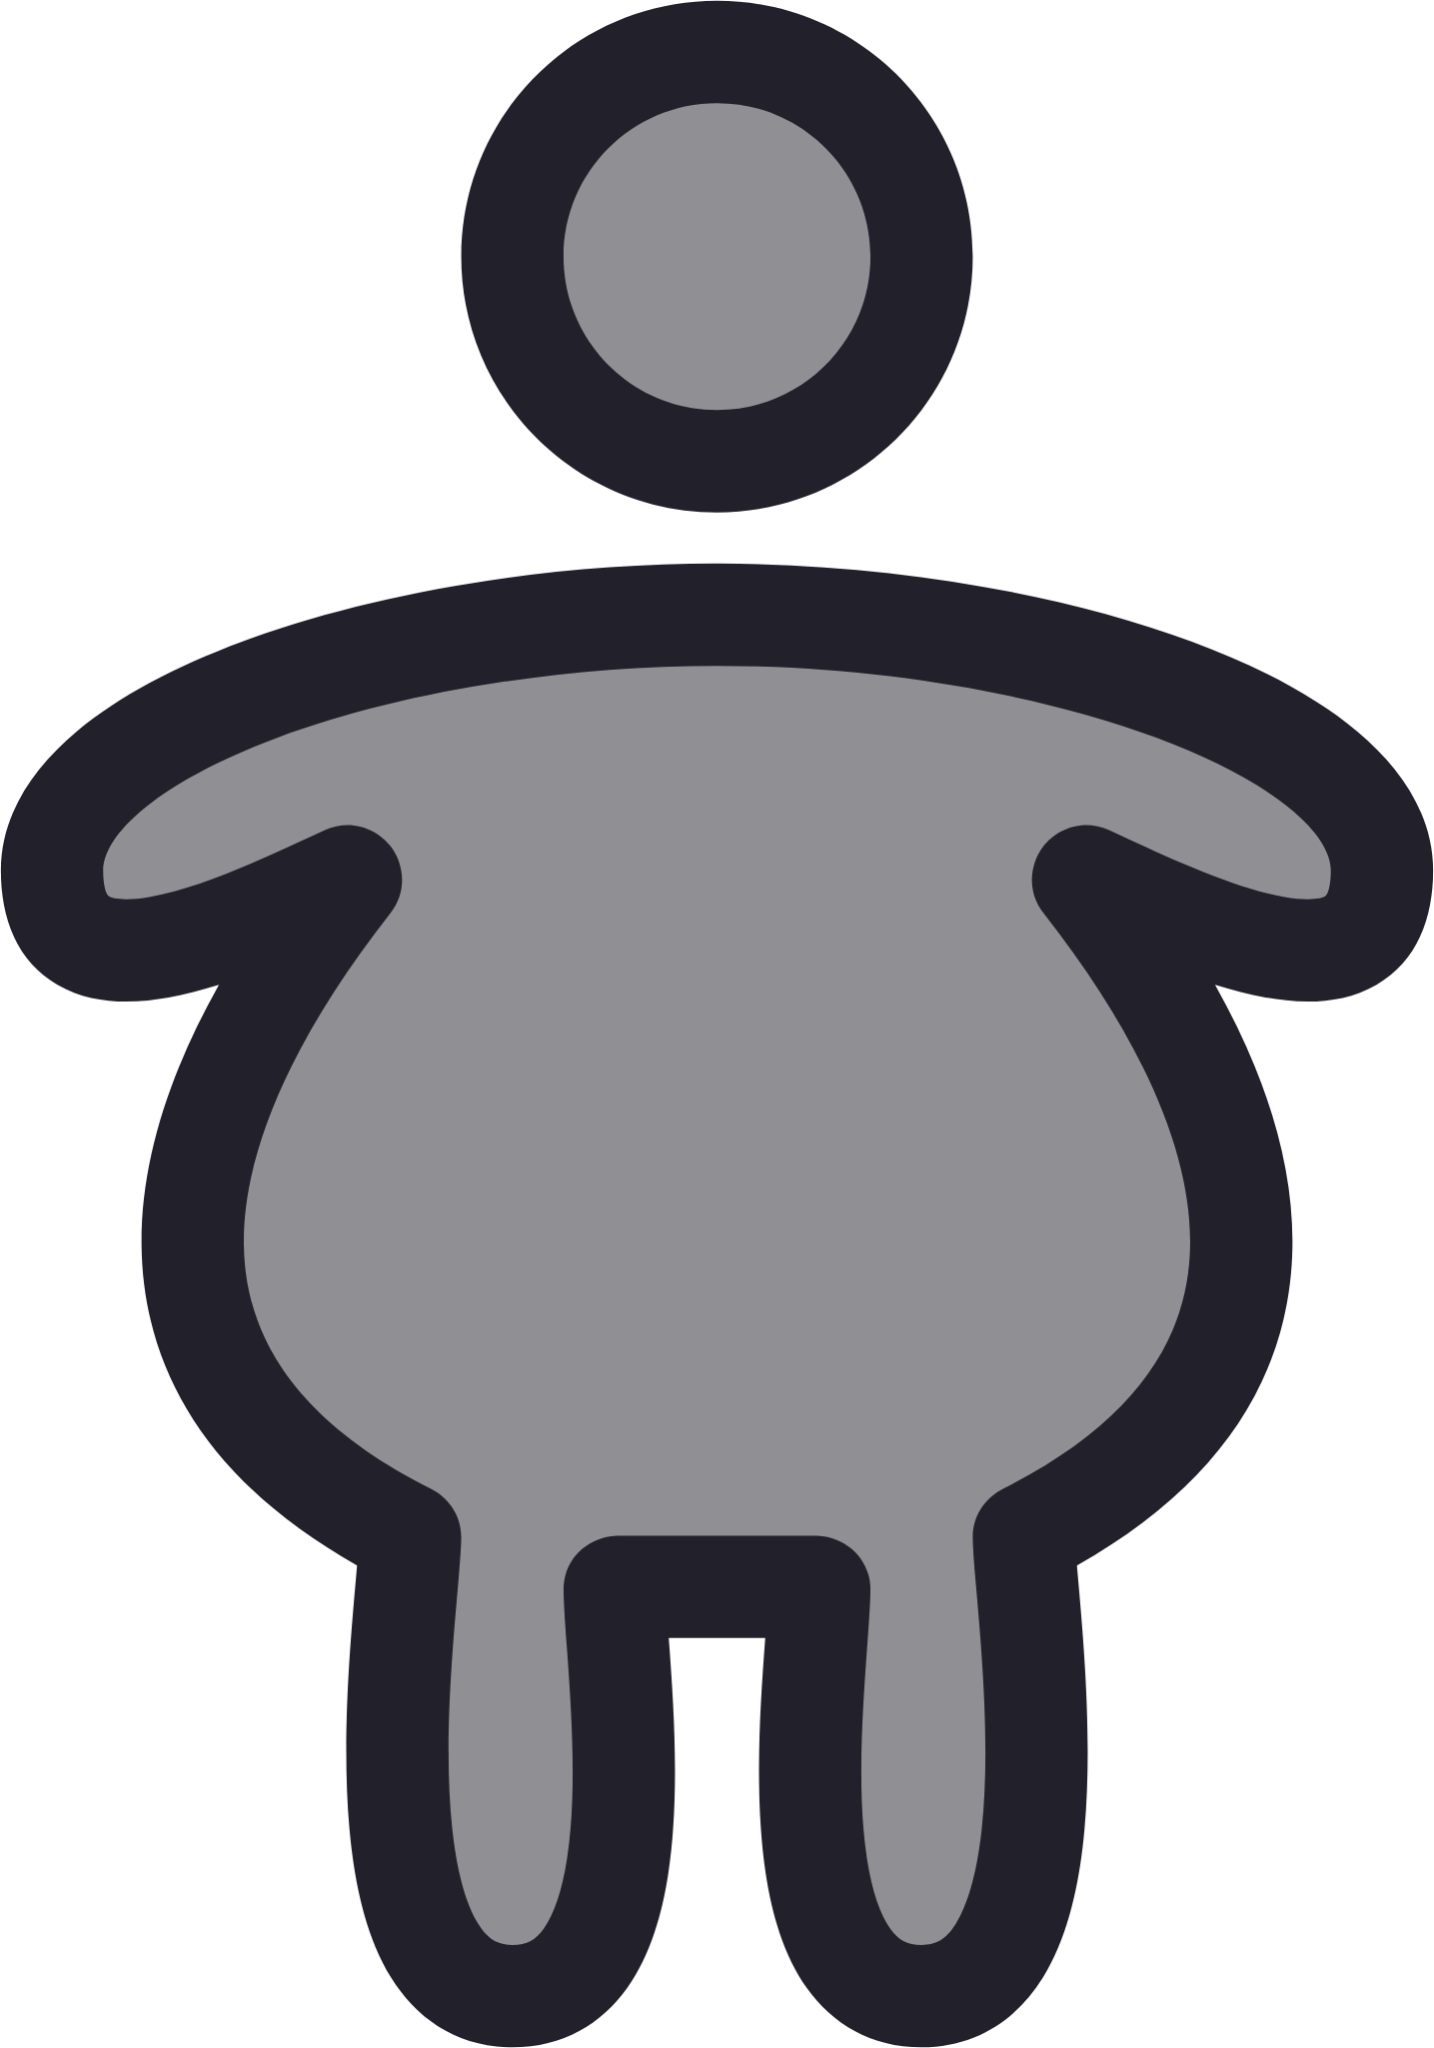 Overweight icon